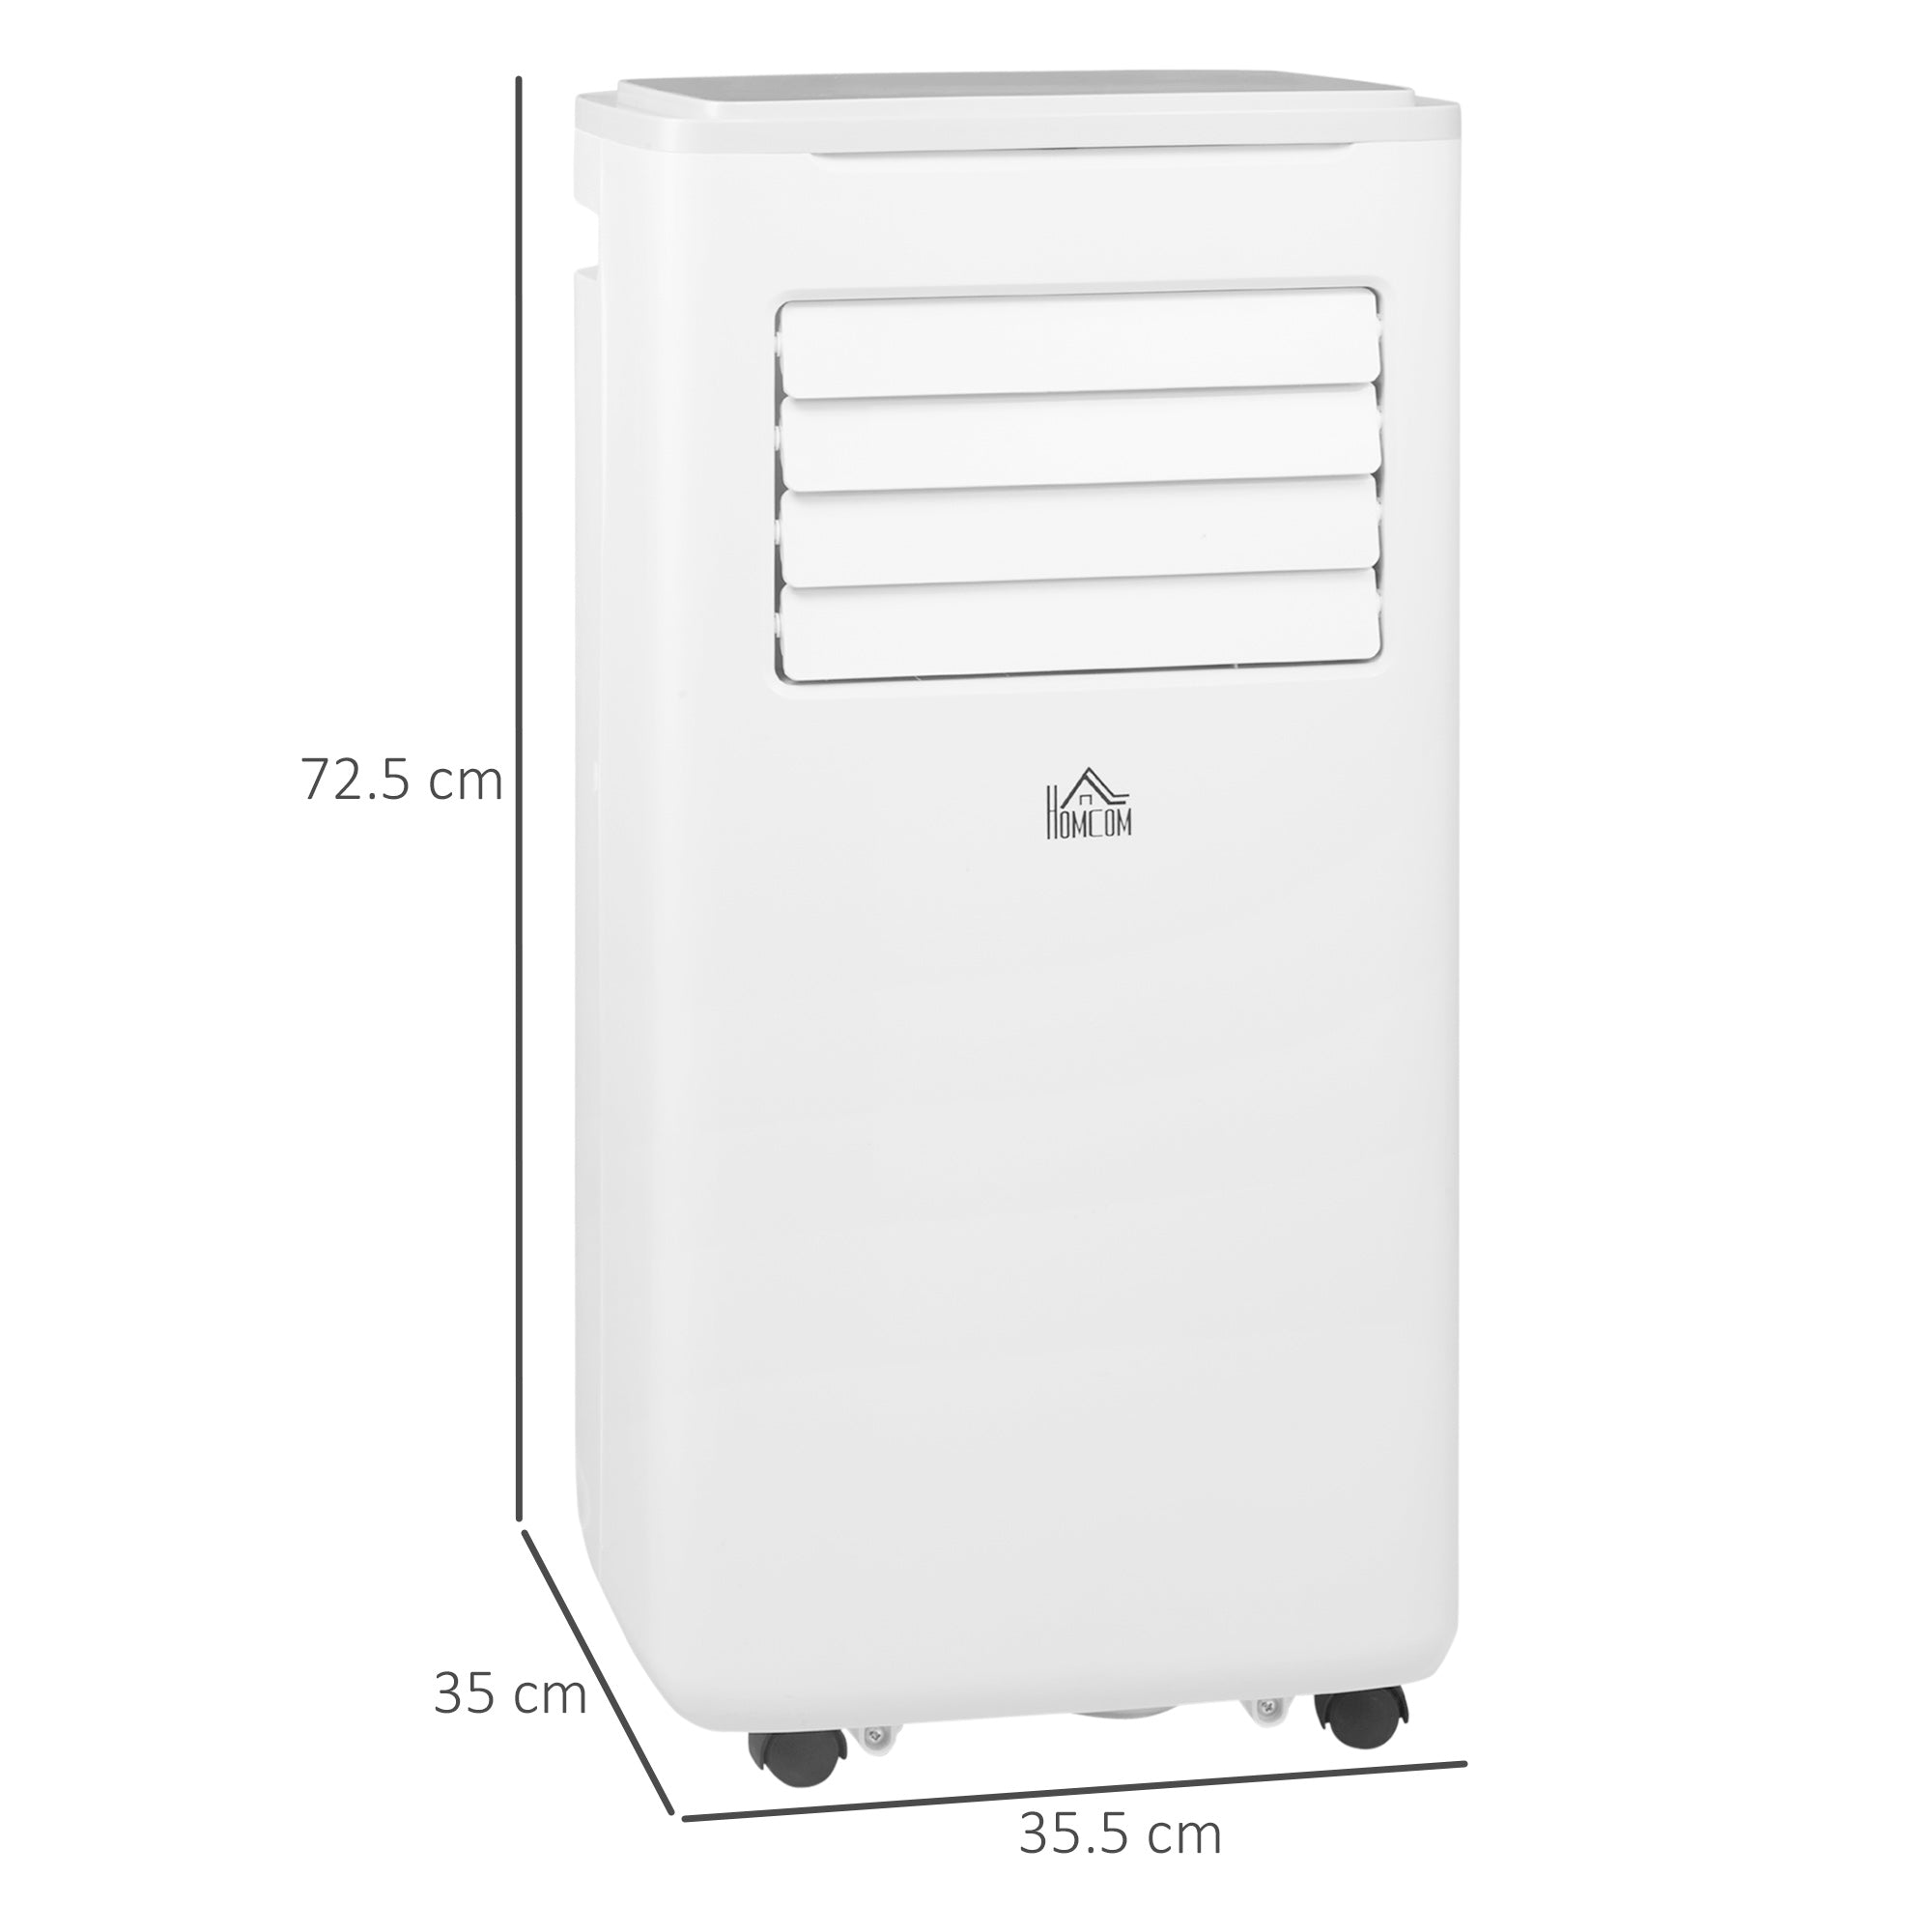 9,000 BTU Portable Air Conditioner, Smart Home WiFi Compatible, Dehumidifier Cooling Fan for Room up to 20m², with Remote, LED Display White-2